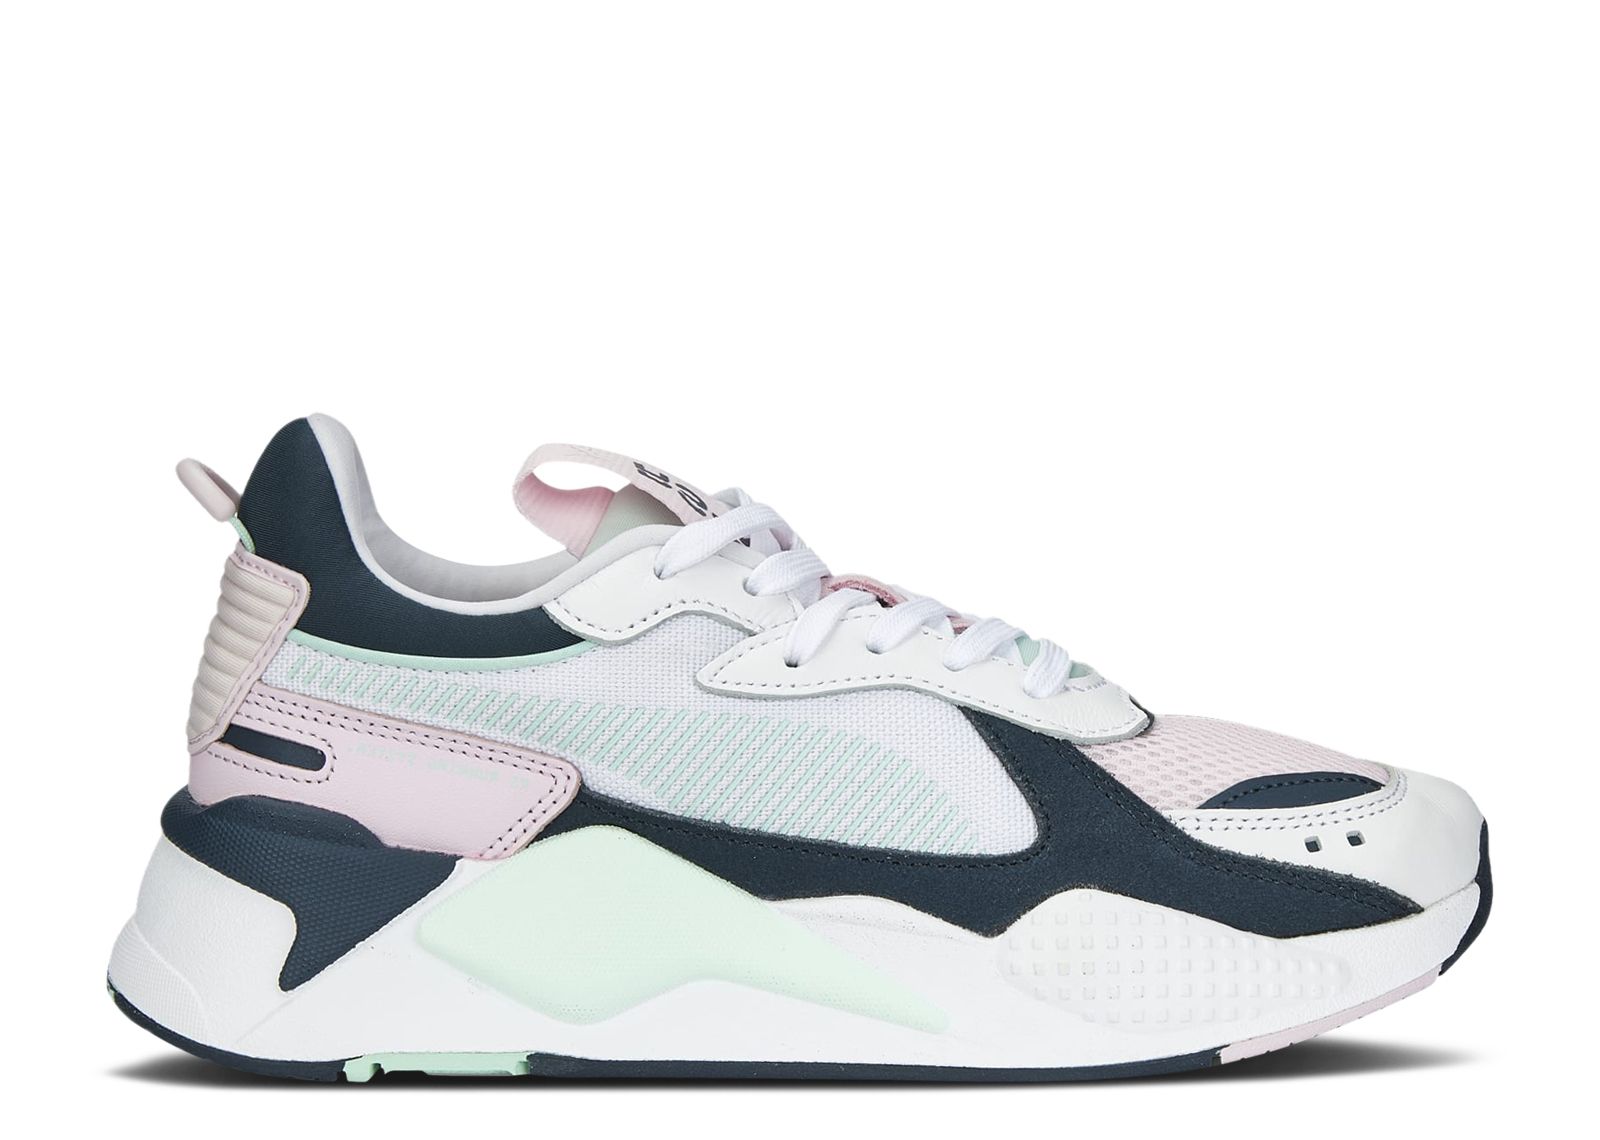 Кроссовки Puma Rs-X Reinvention 'White Peacoat Pearl Pink', белый кроссовки puma tmc x rs x white peacoat белый